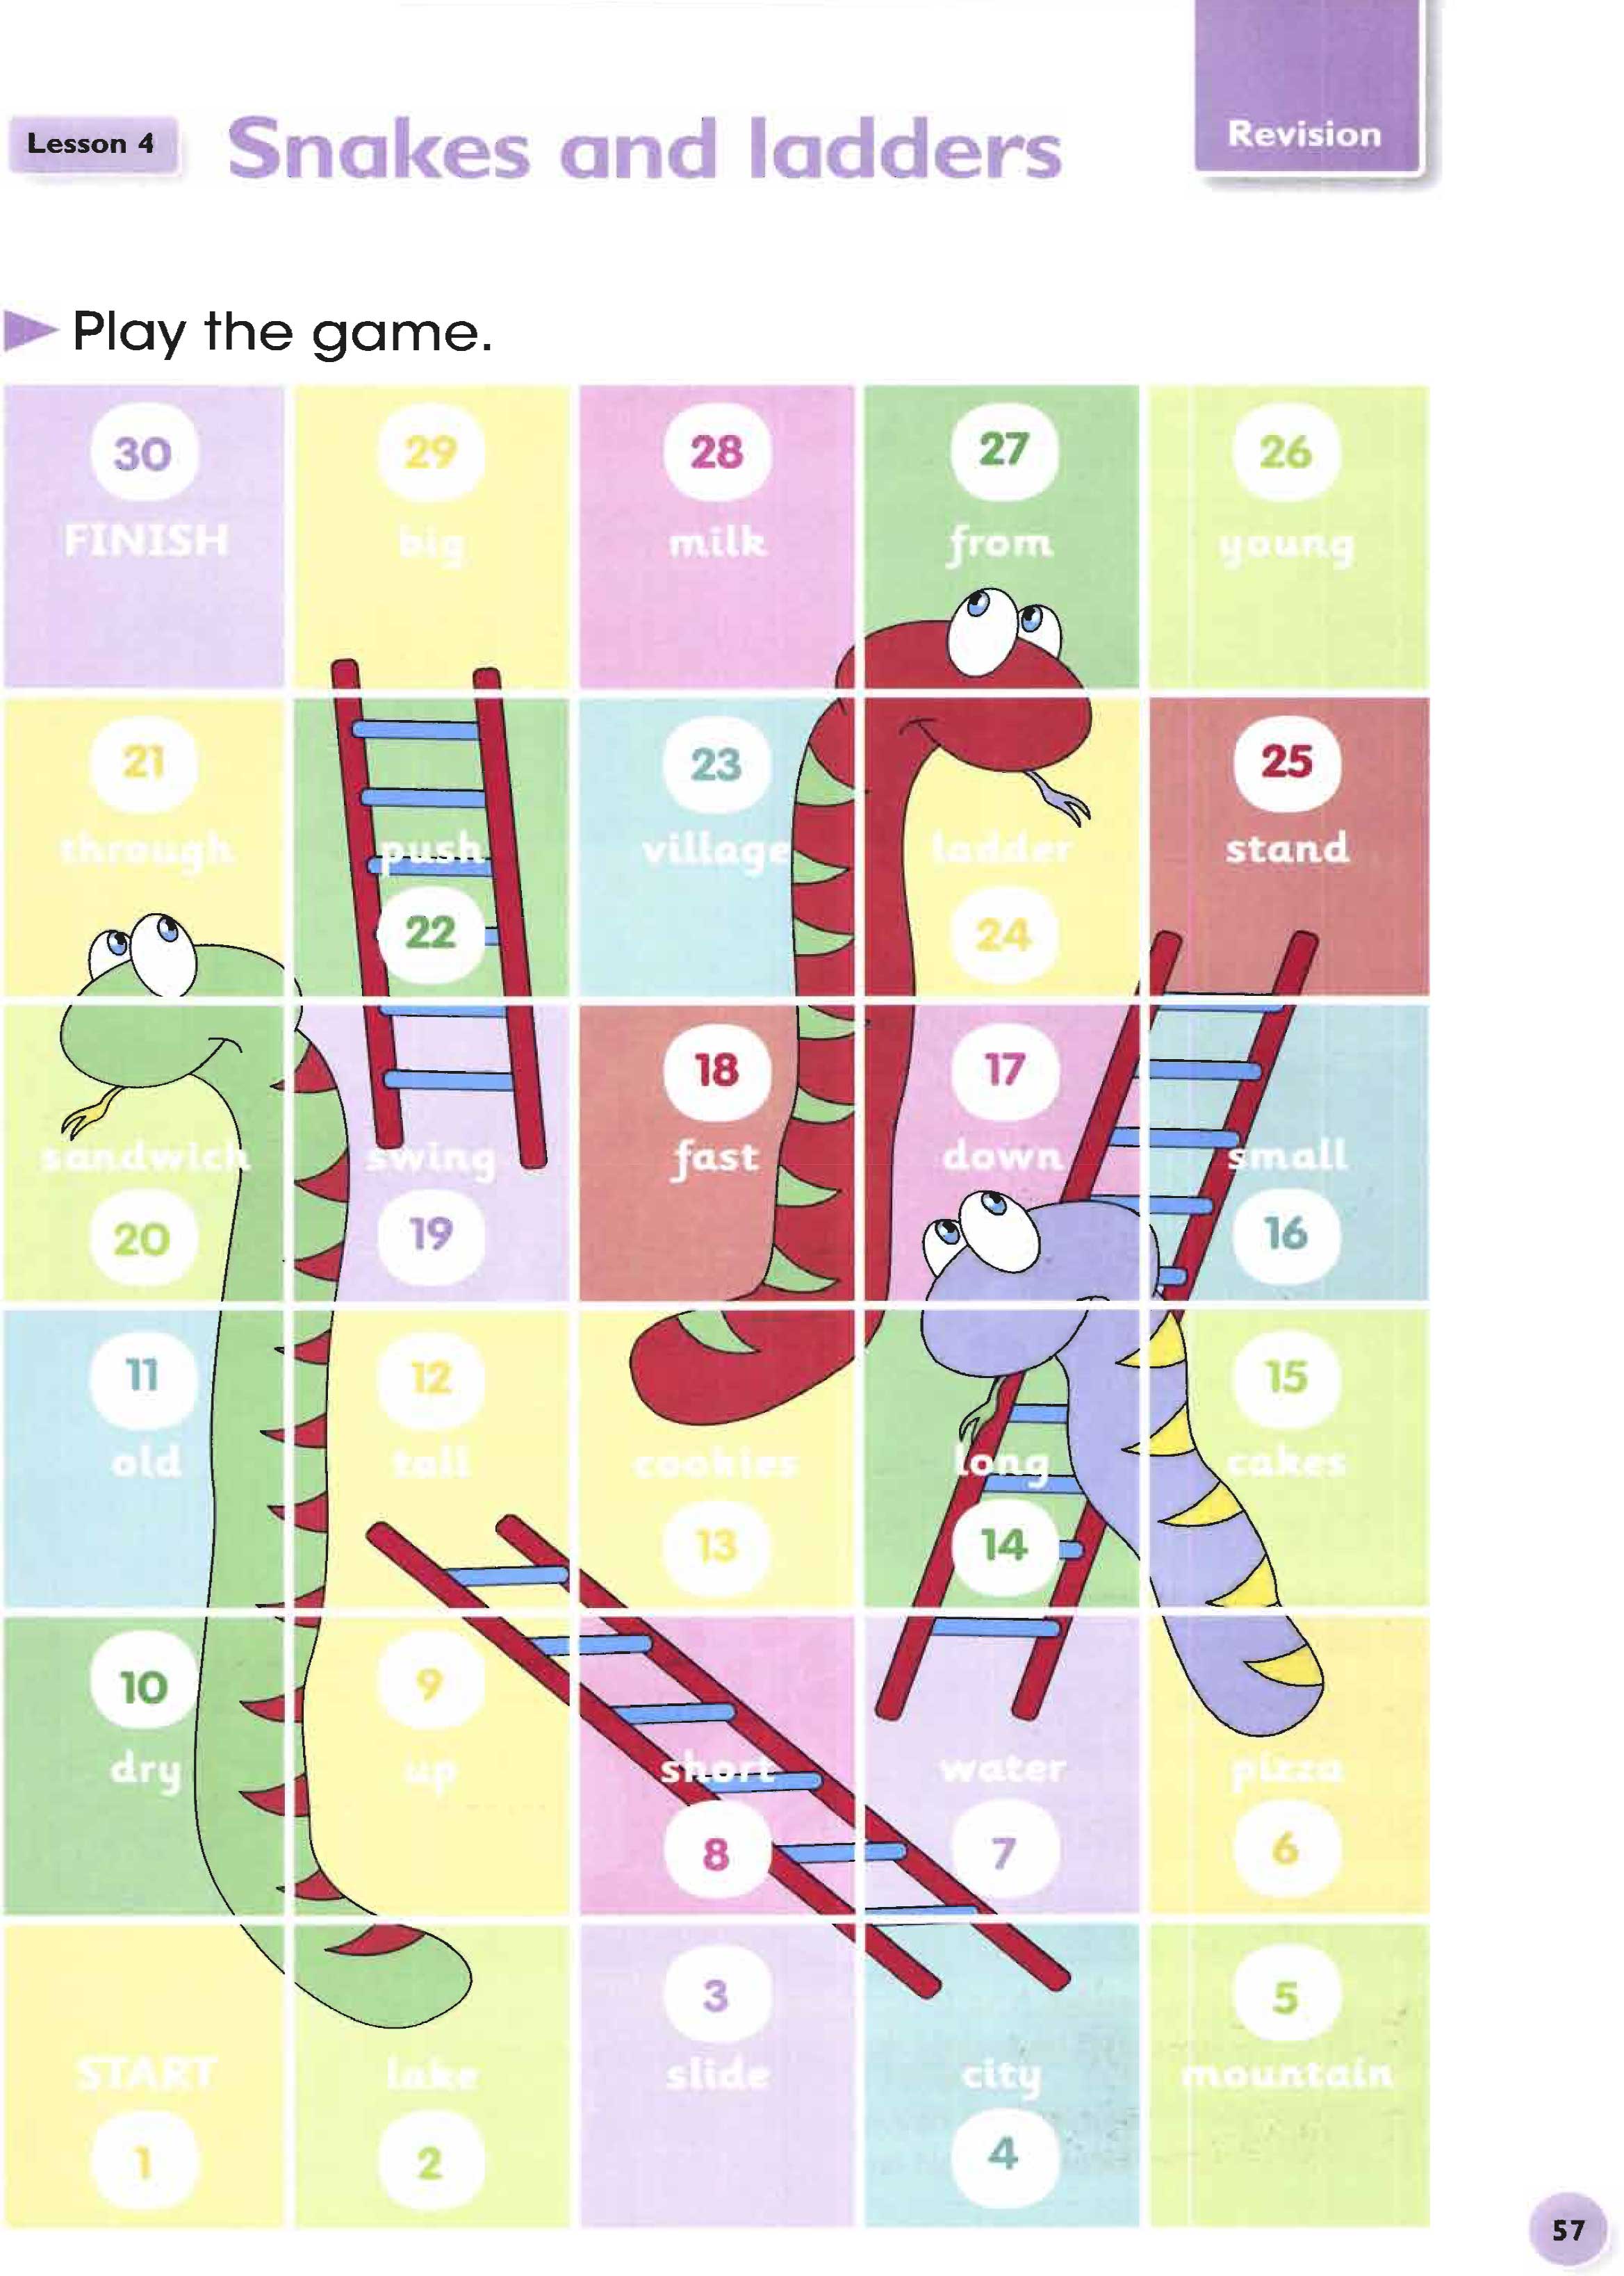 Lesson4:Snakes and ladders